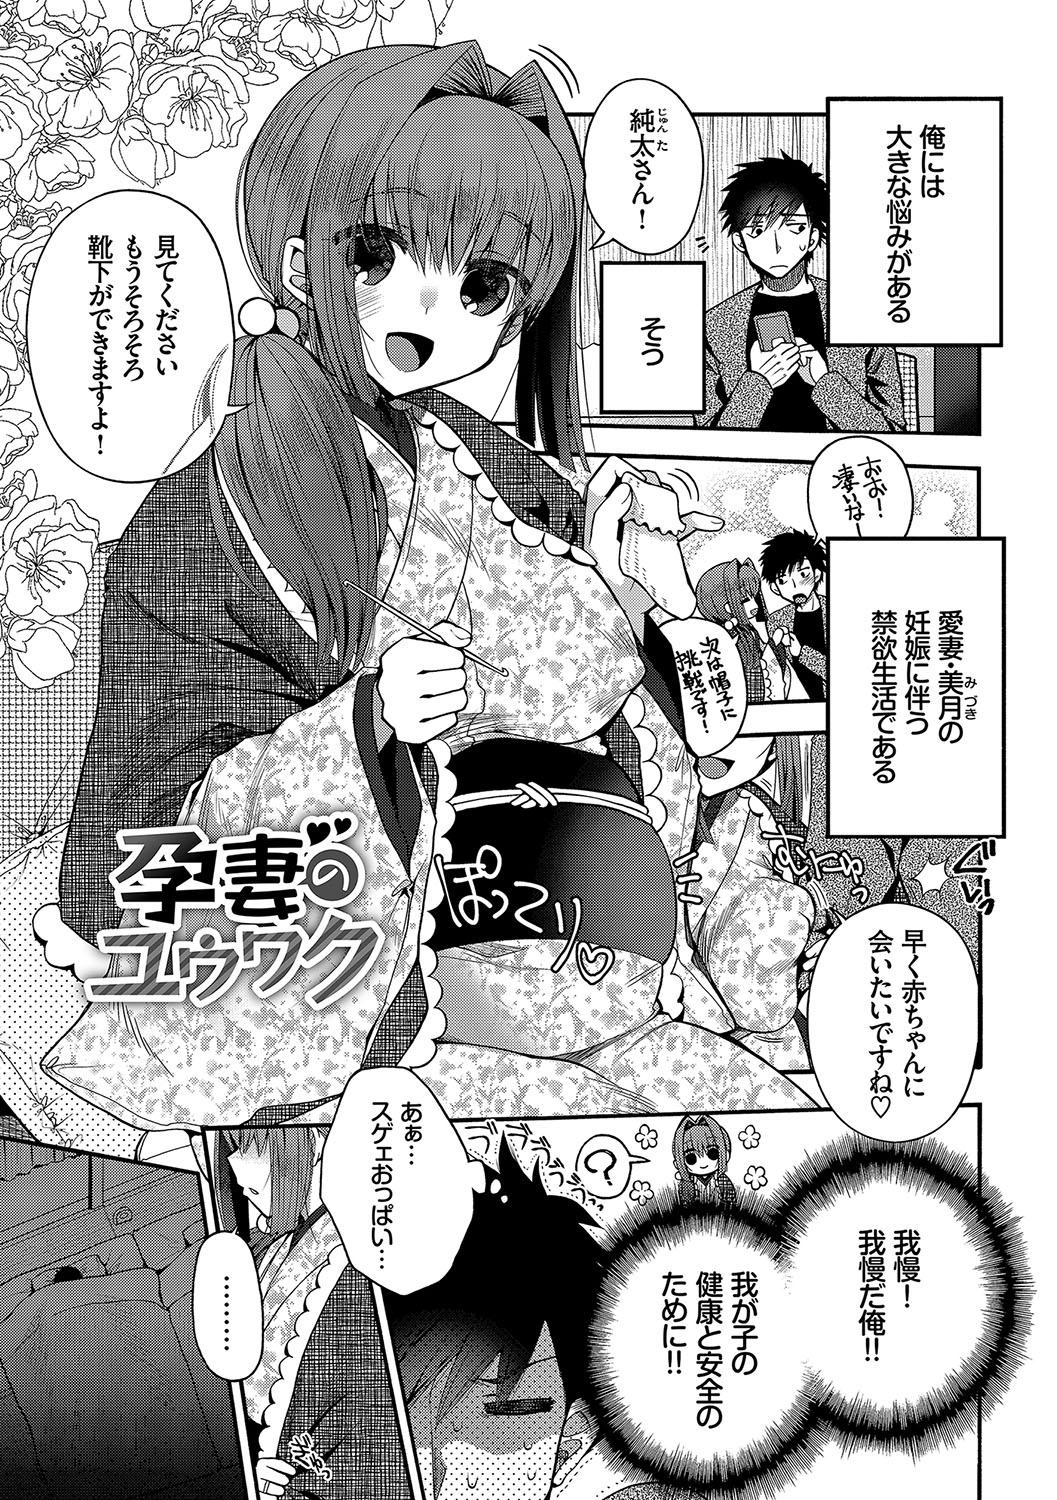 Hatsukoi Melty - Melty First Love 191